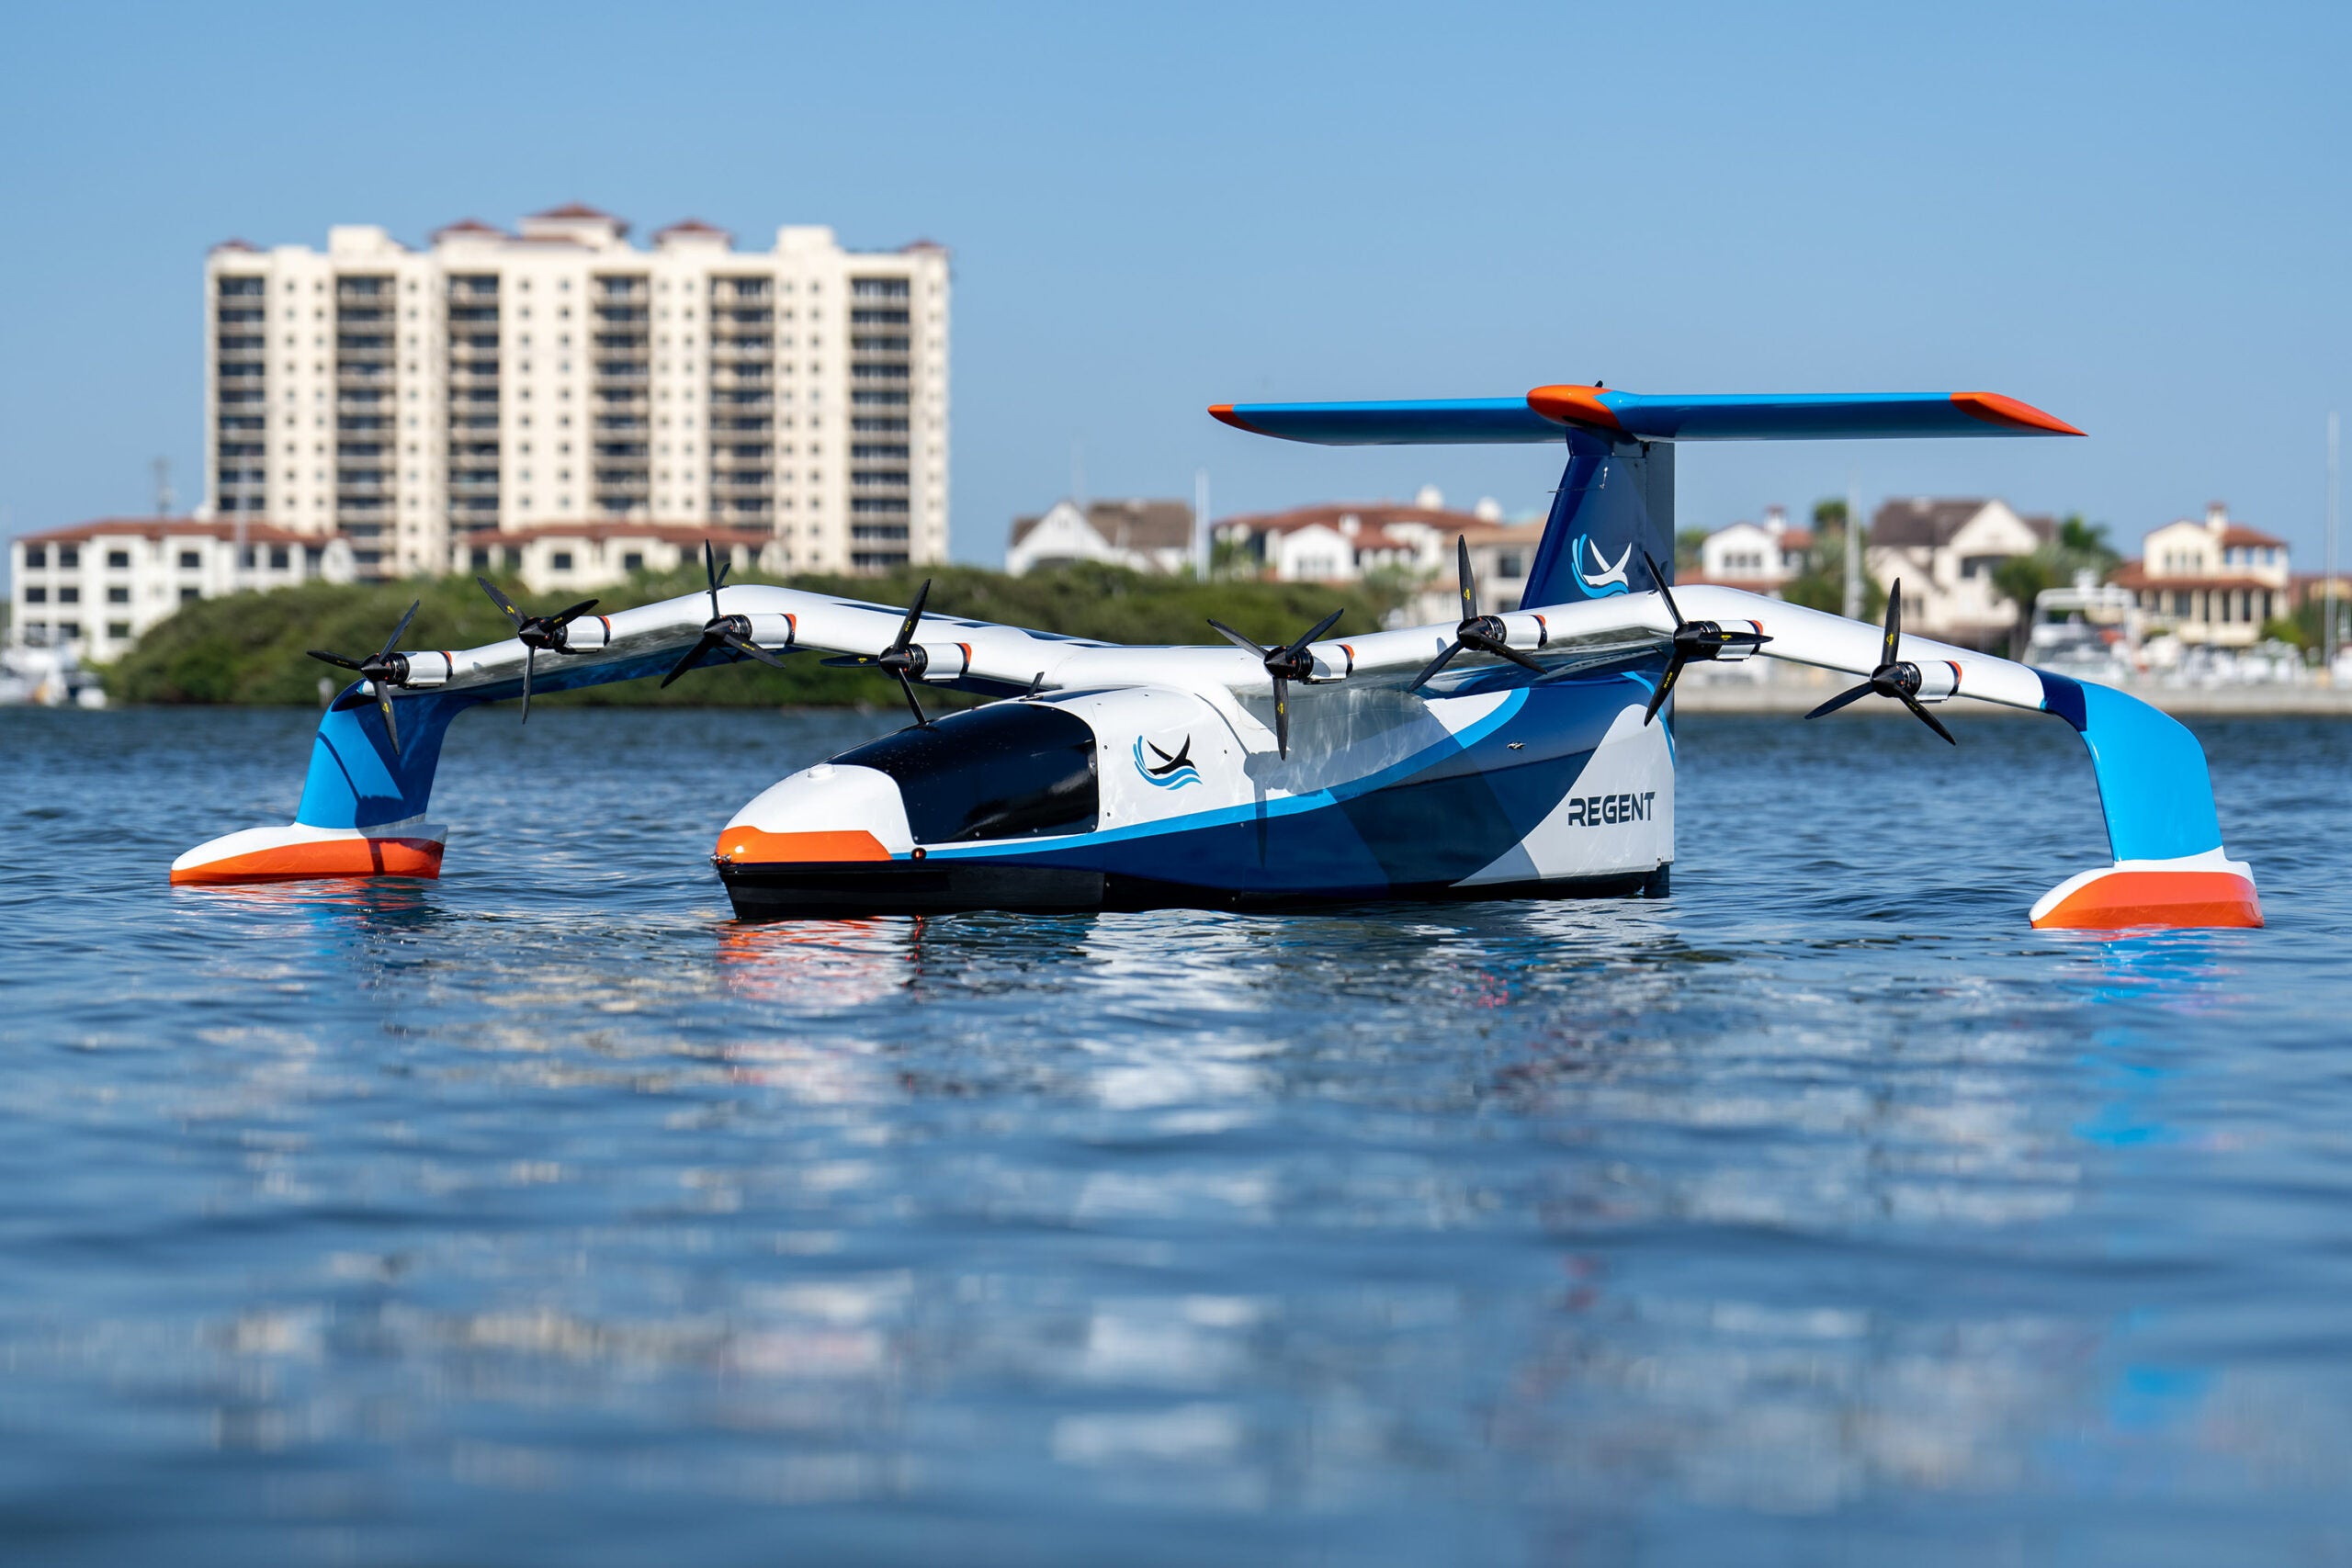 Seaglider Electric Scale Model Makes First Flights In Rhode Island